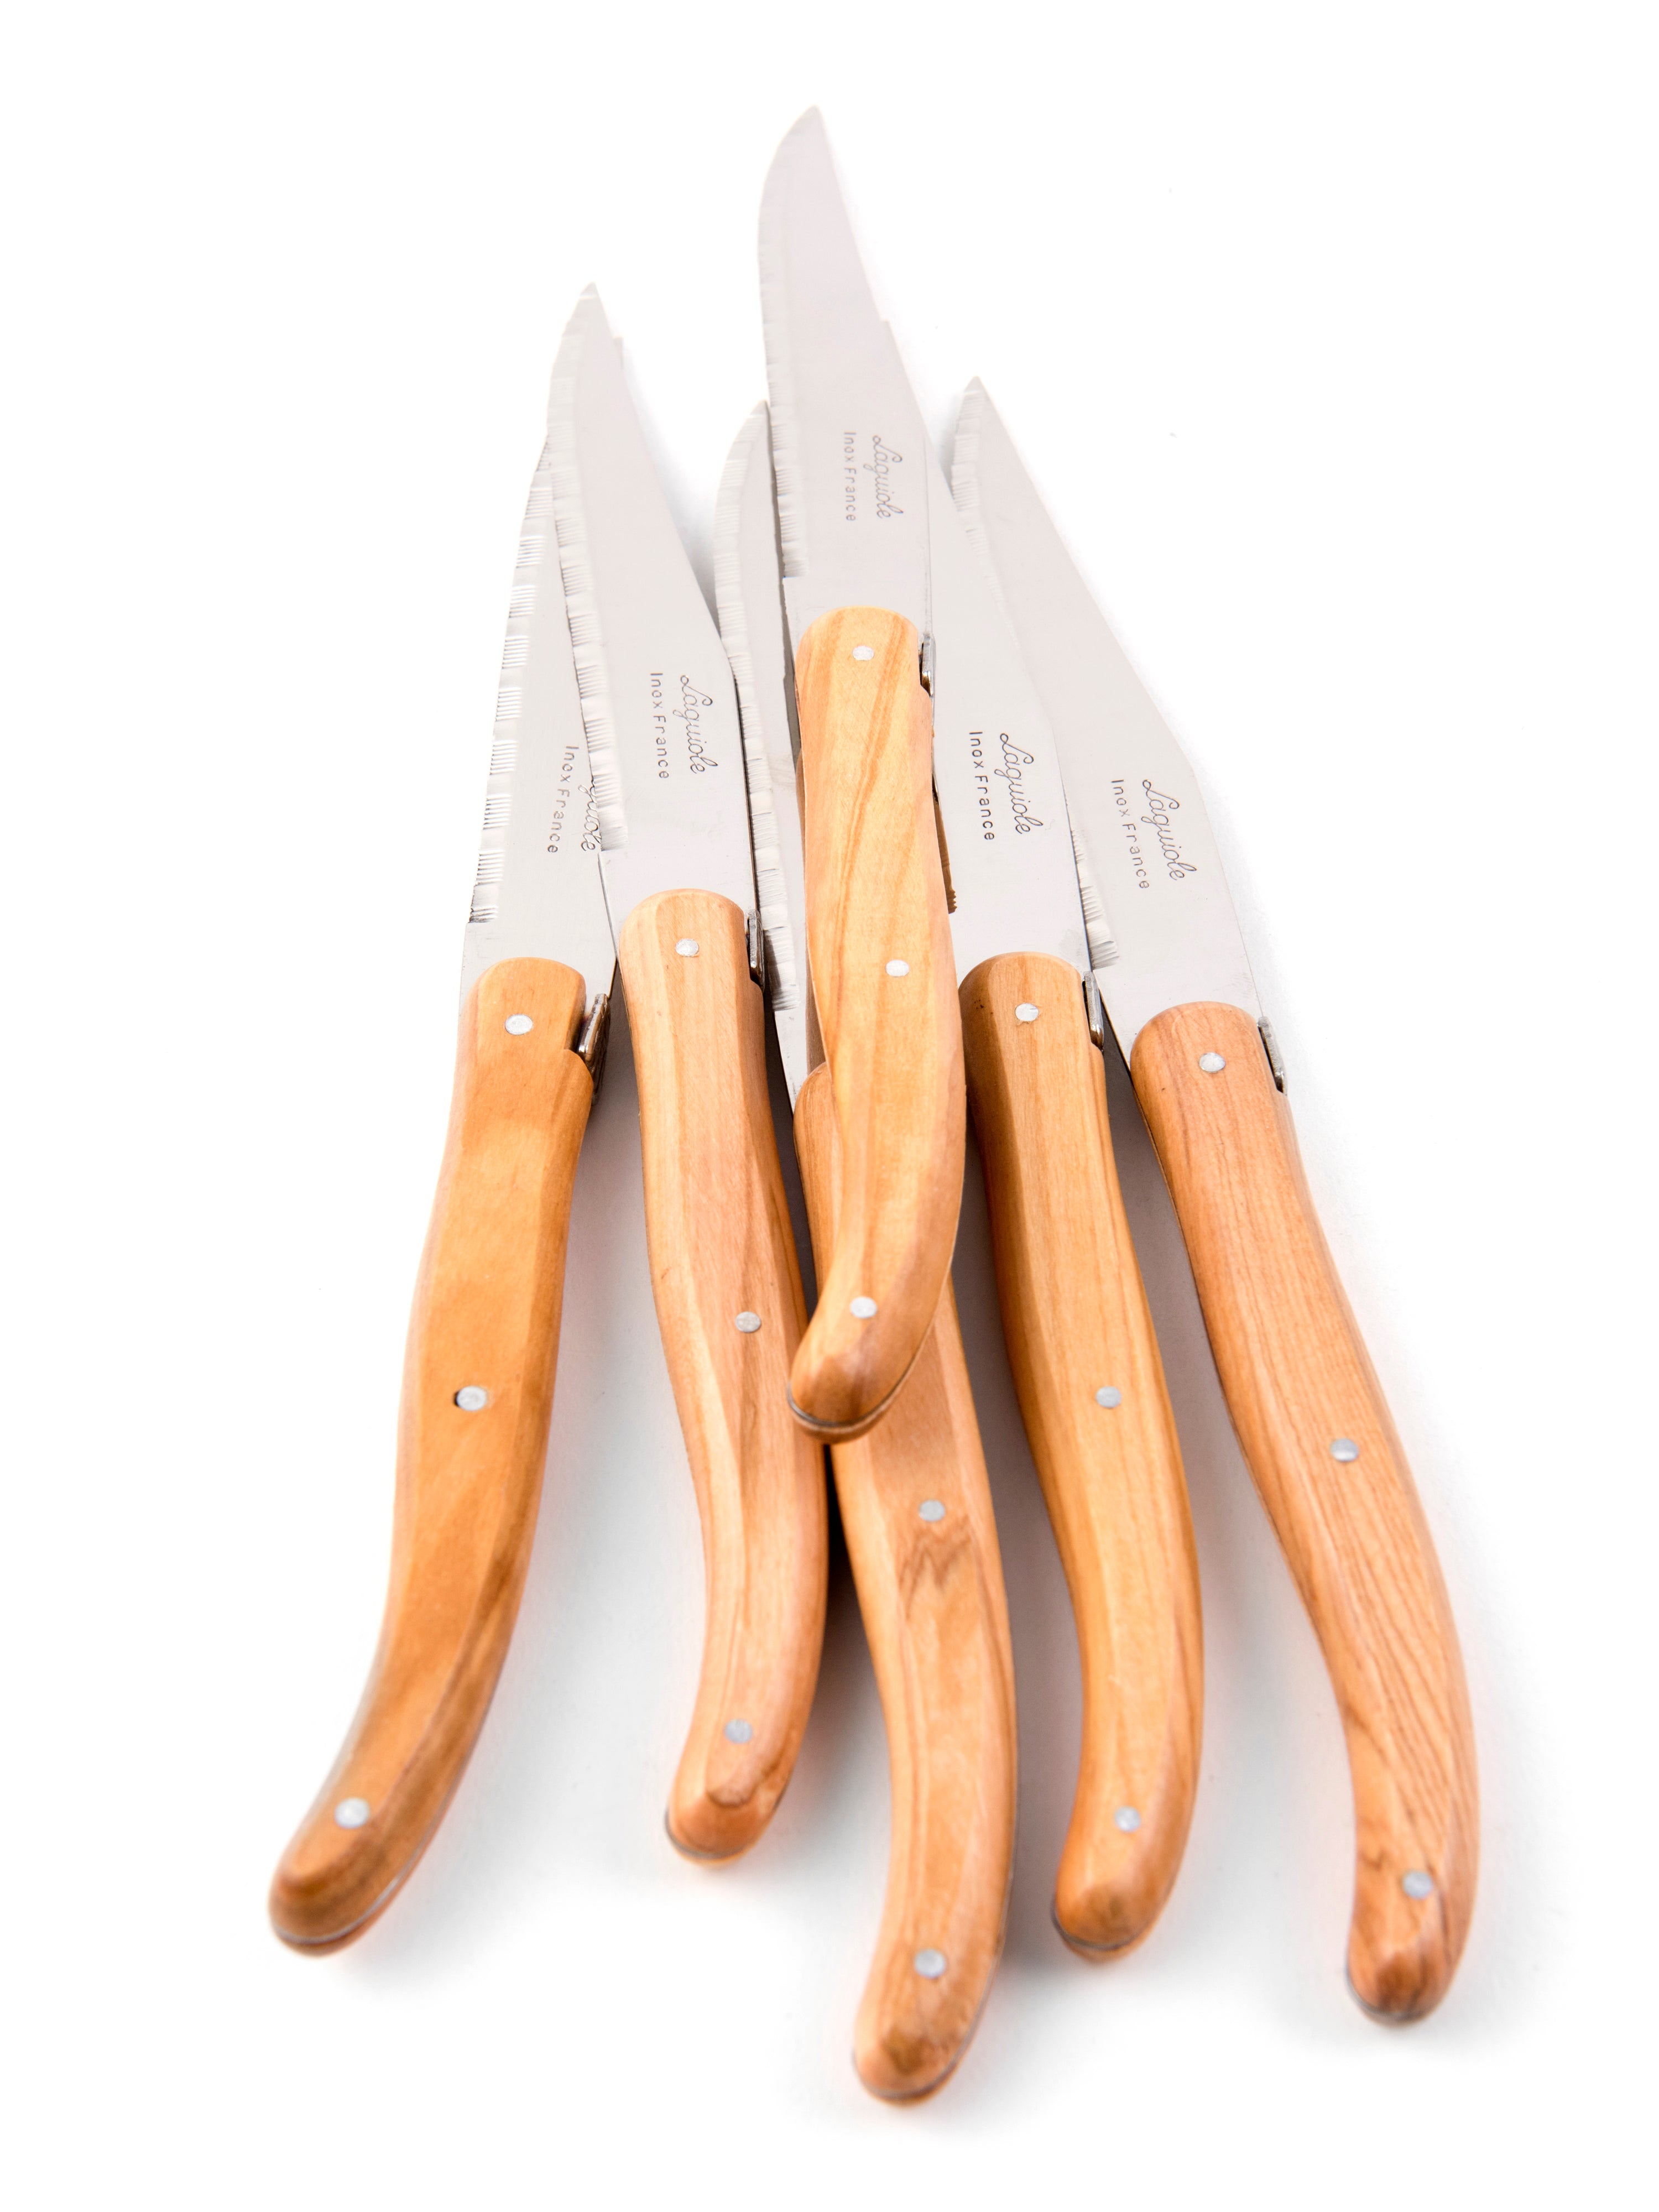 Laguiole Olivewood Knives in Wooden Box with Acrylic Lid (Set of 6) Cutlery Laguiole Brand_Laguiole Flatware Sets Kitchen_Dinnerware Kitchen_Kitchenware Laguiole DSC3631_JasonLeCras_LG_cda67a8c-9161-4641-a74d-8c1bfe88b245